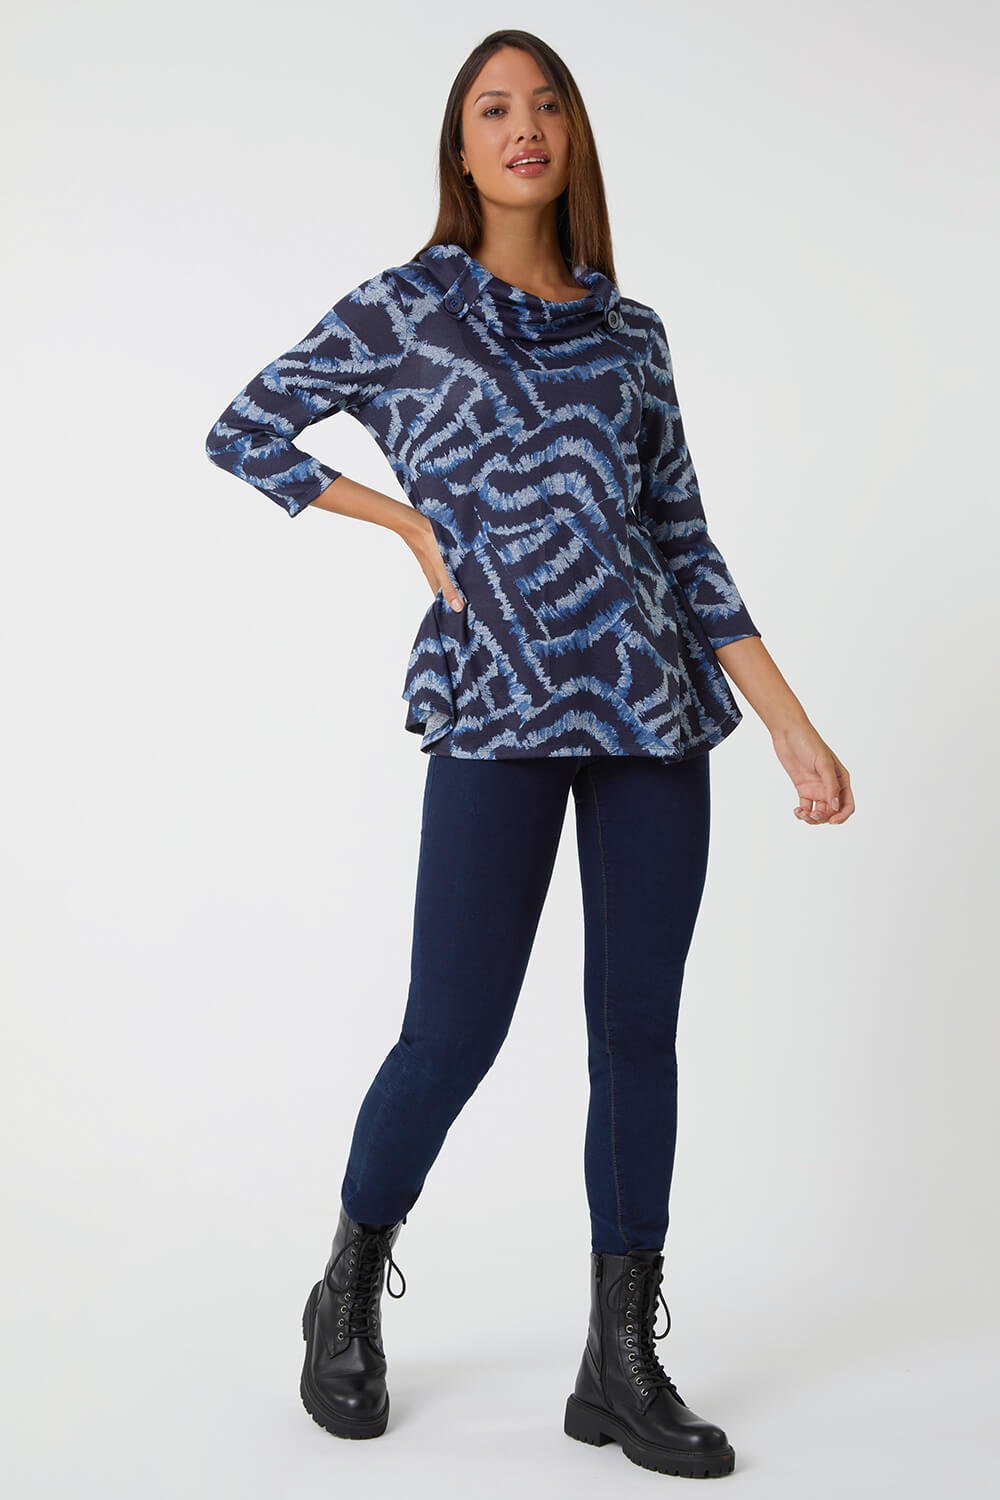 Blue Abstract Print Cowl Neck Stretch Top, Image 2 of 5